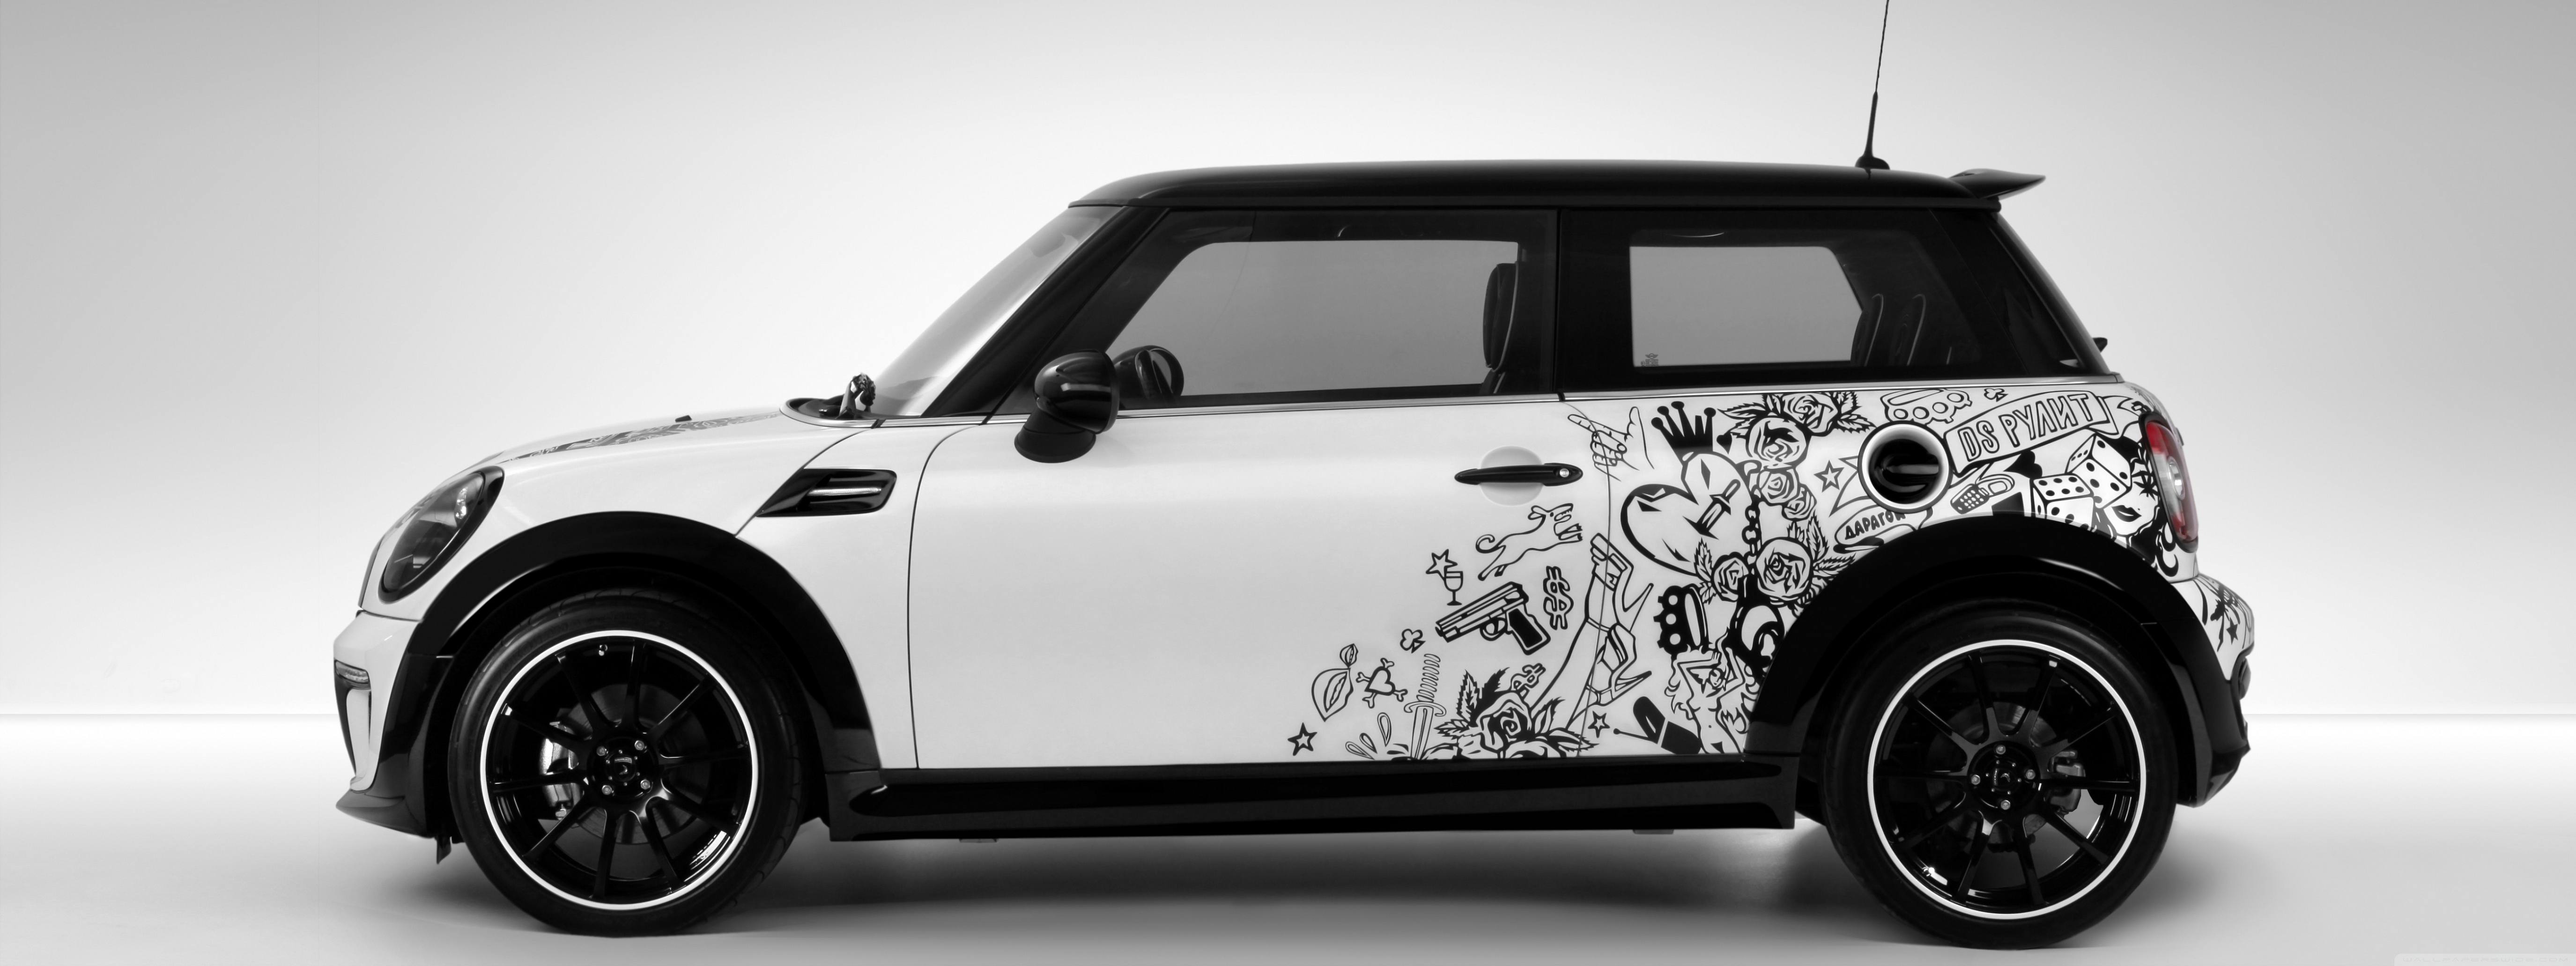 Mini Cooper Wallpapers Images Photos Pictures Backgrounds